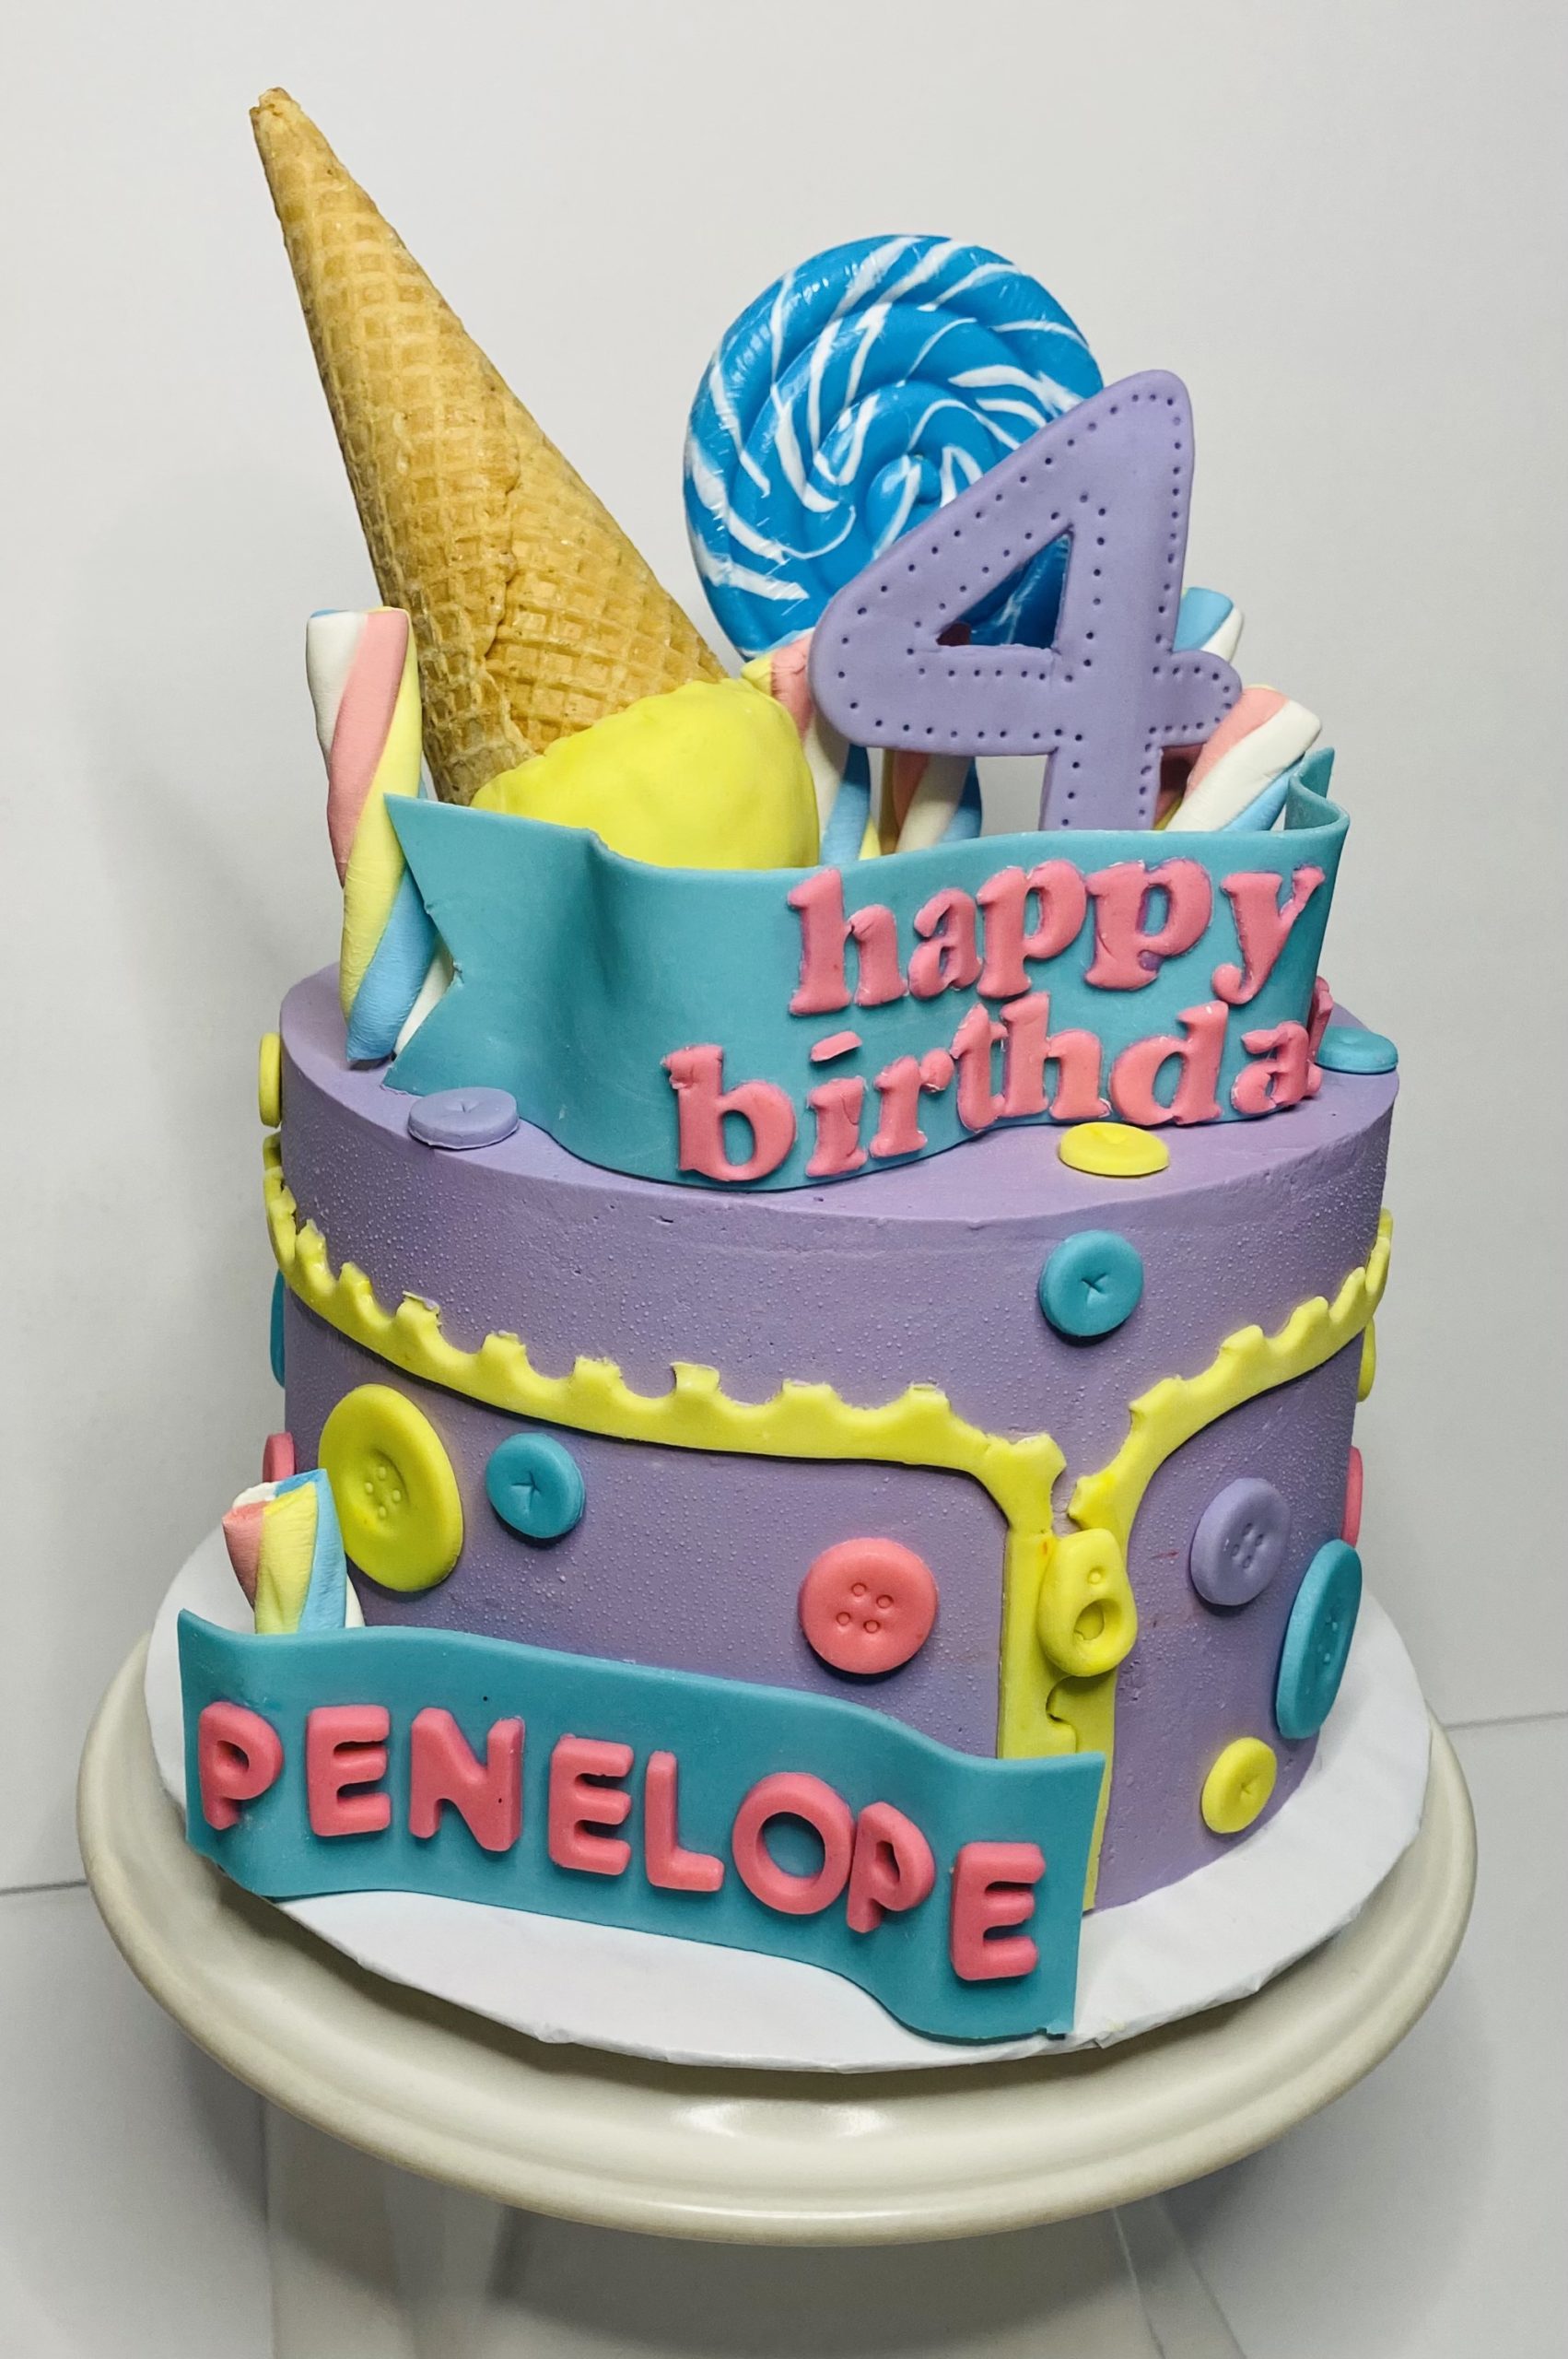 A custom children's birthday cake with hand-crafted fondant decorations from Village Patisserie in Toledo, Ohio